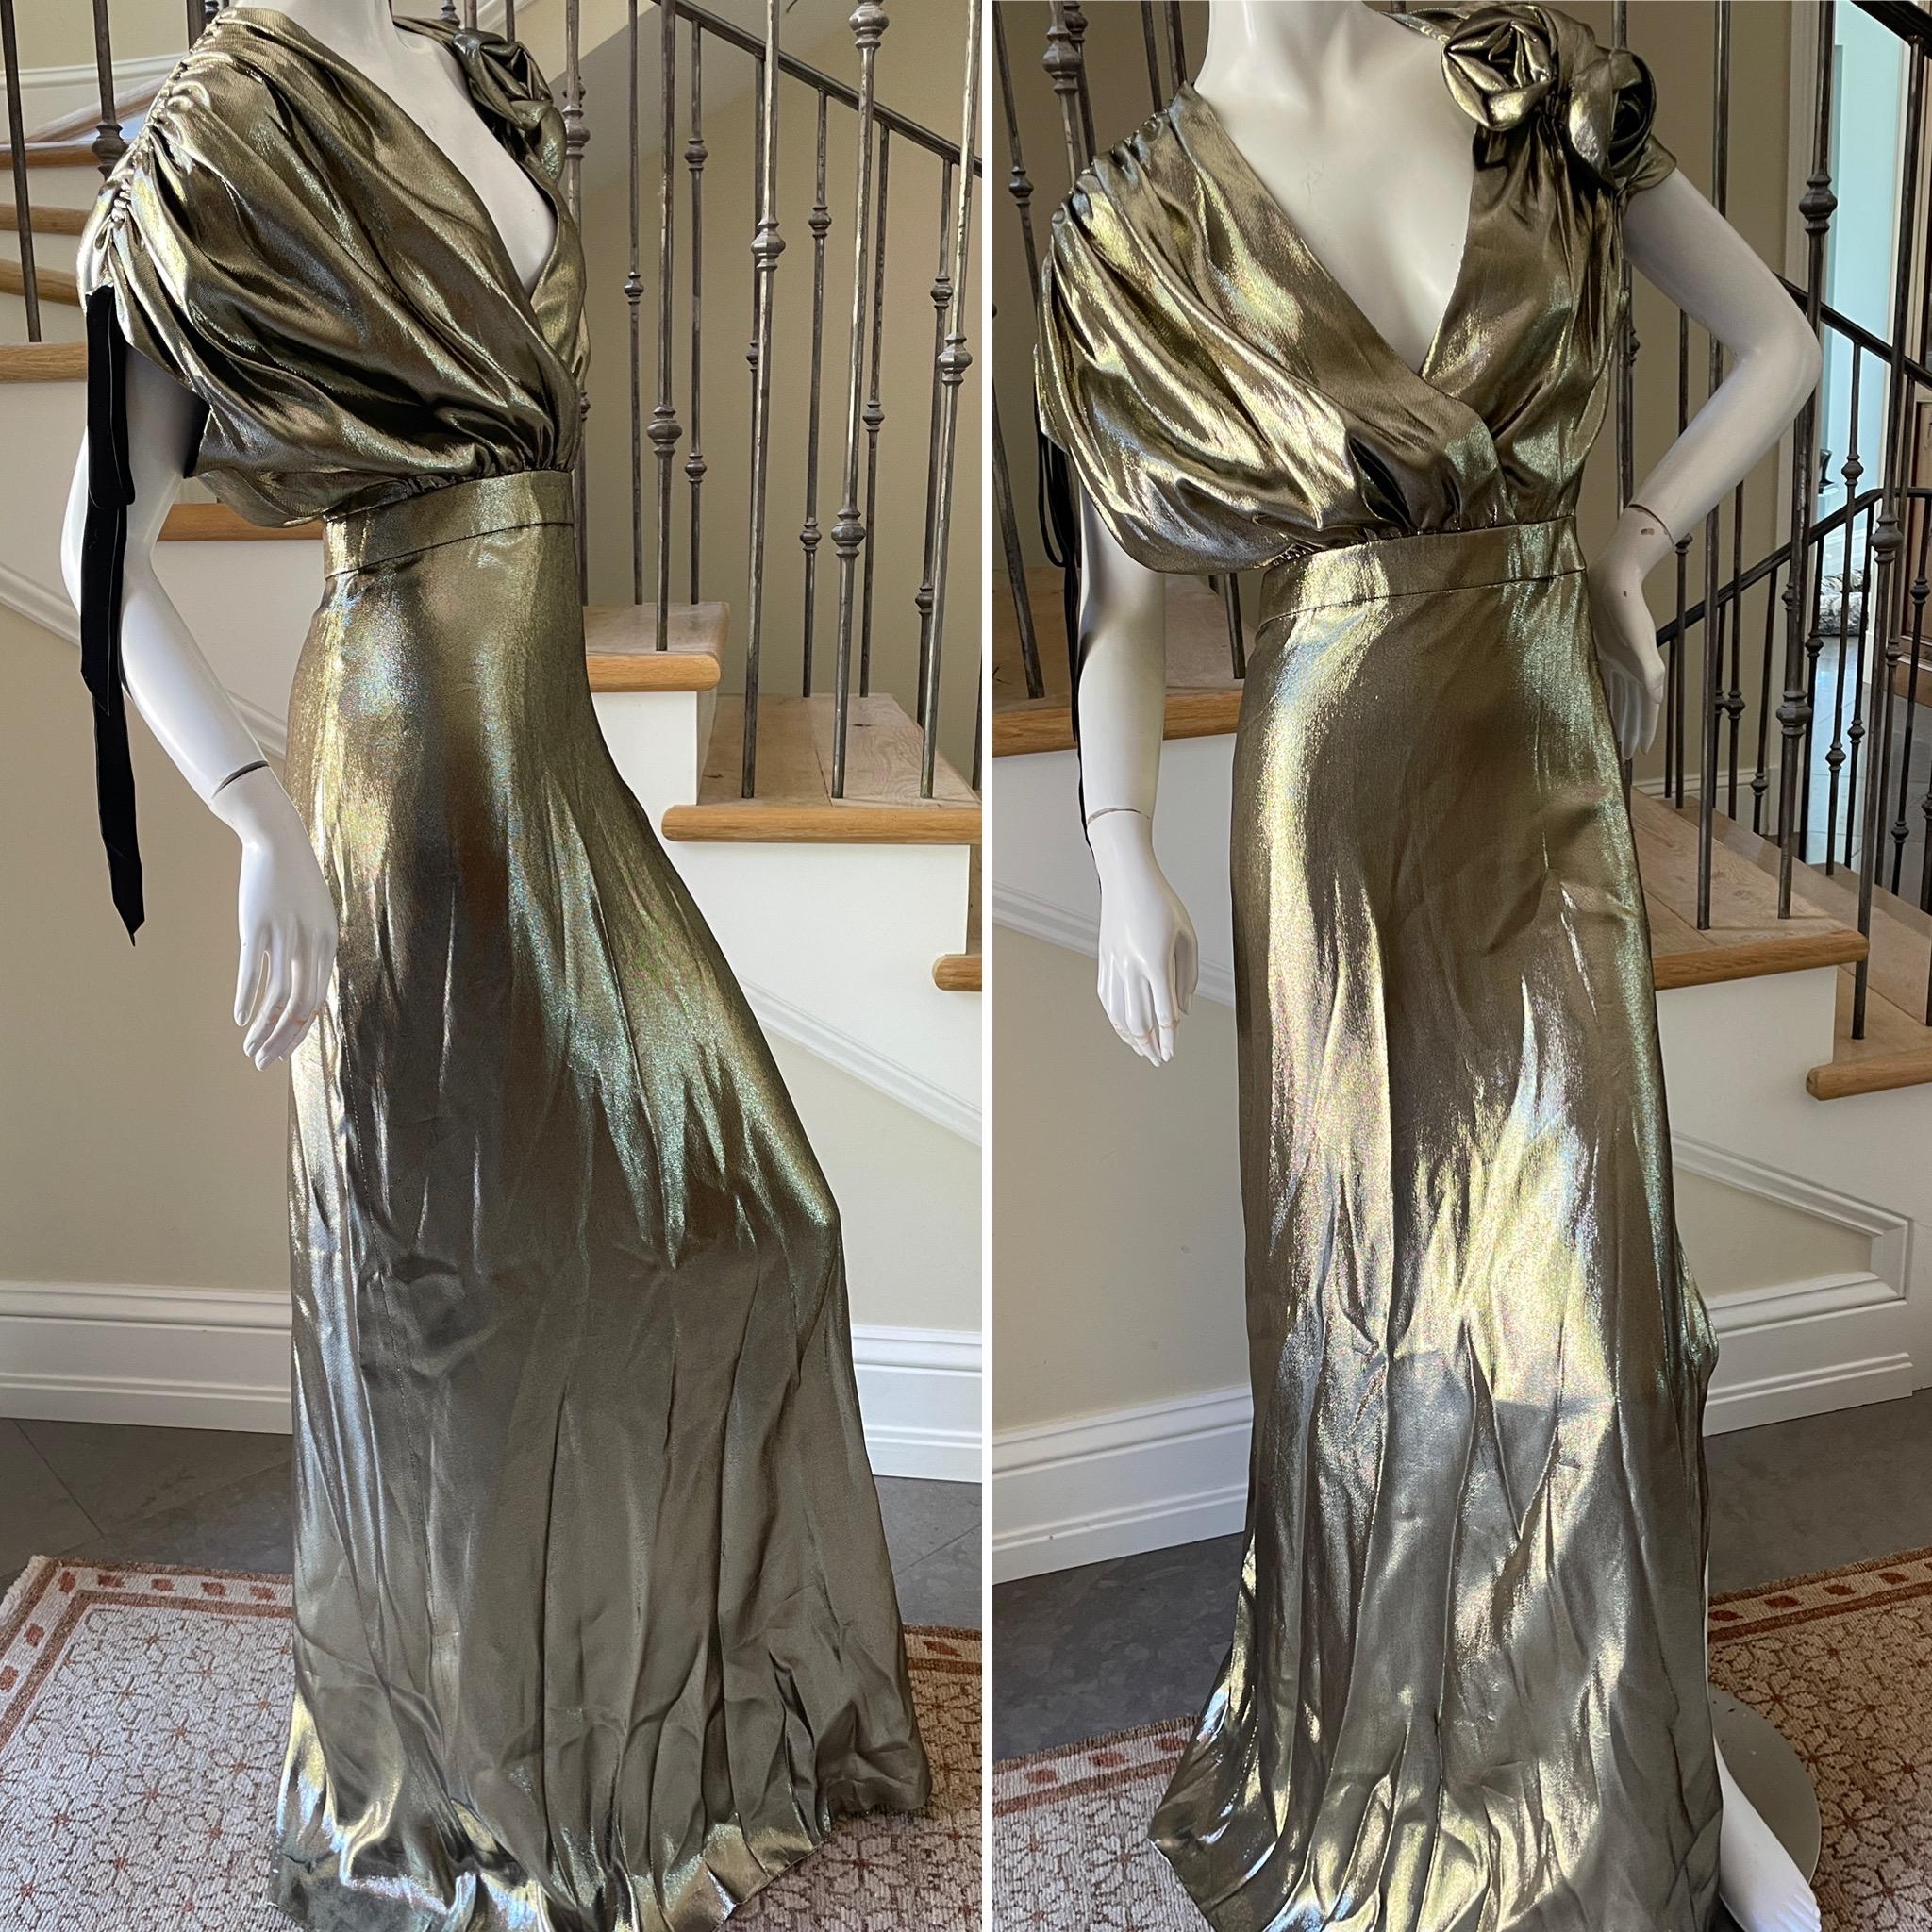 Lanvin 1930's Style Goddess Gown
New unworn with tags
 So beautiful, much prettier in person.
This is exquisite.
Size 42
 Bust 39